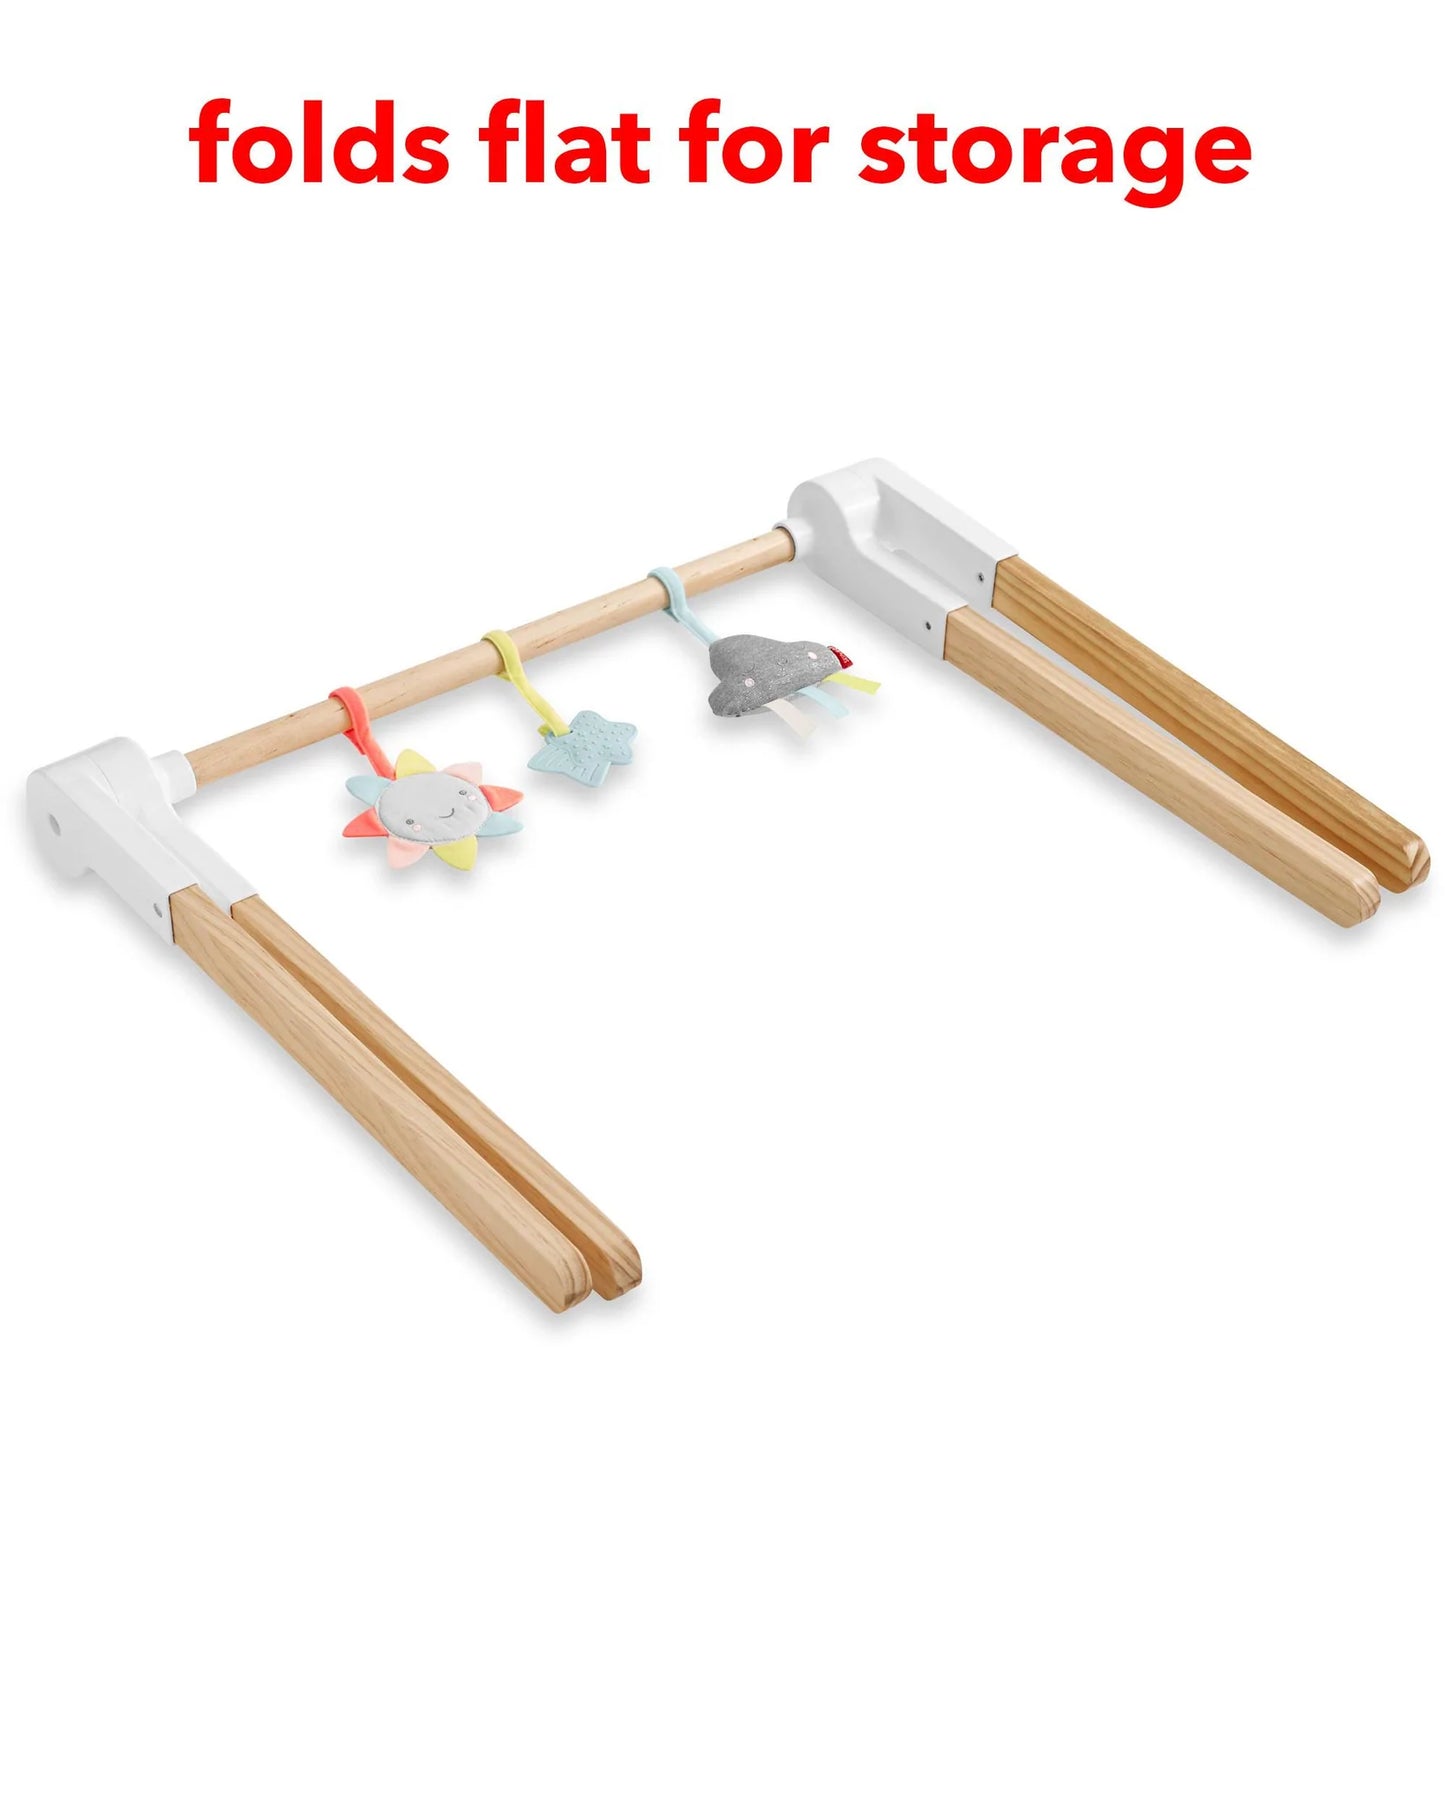 Skip Hop - Silver Lining Cloud Wooden Activity Gym